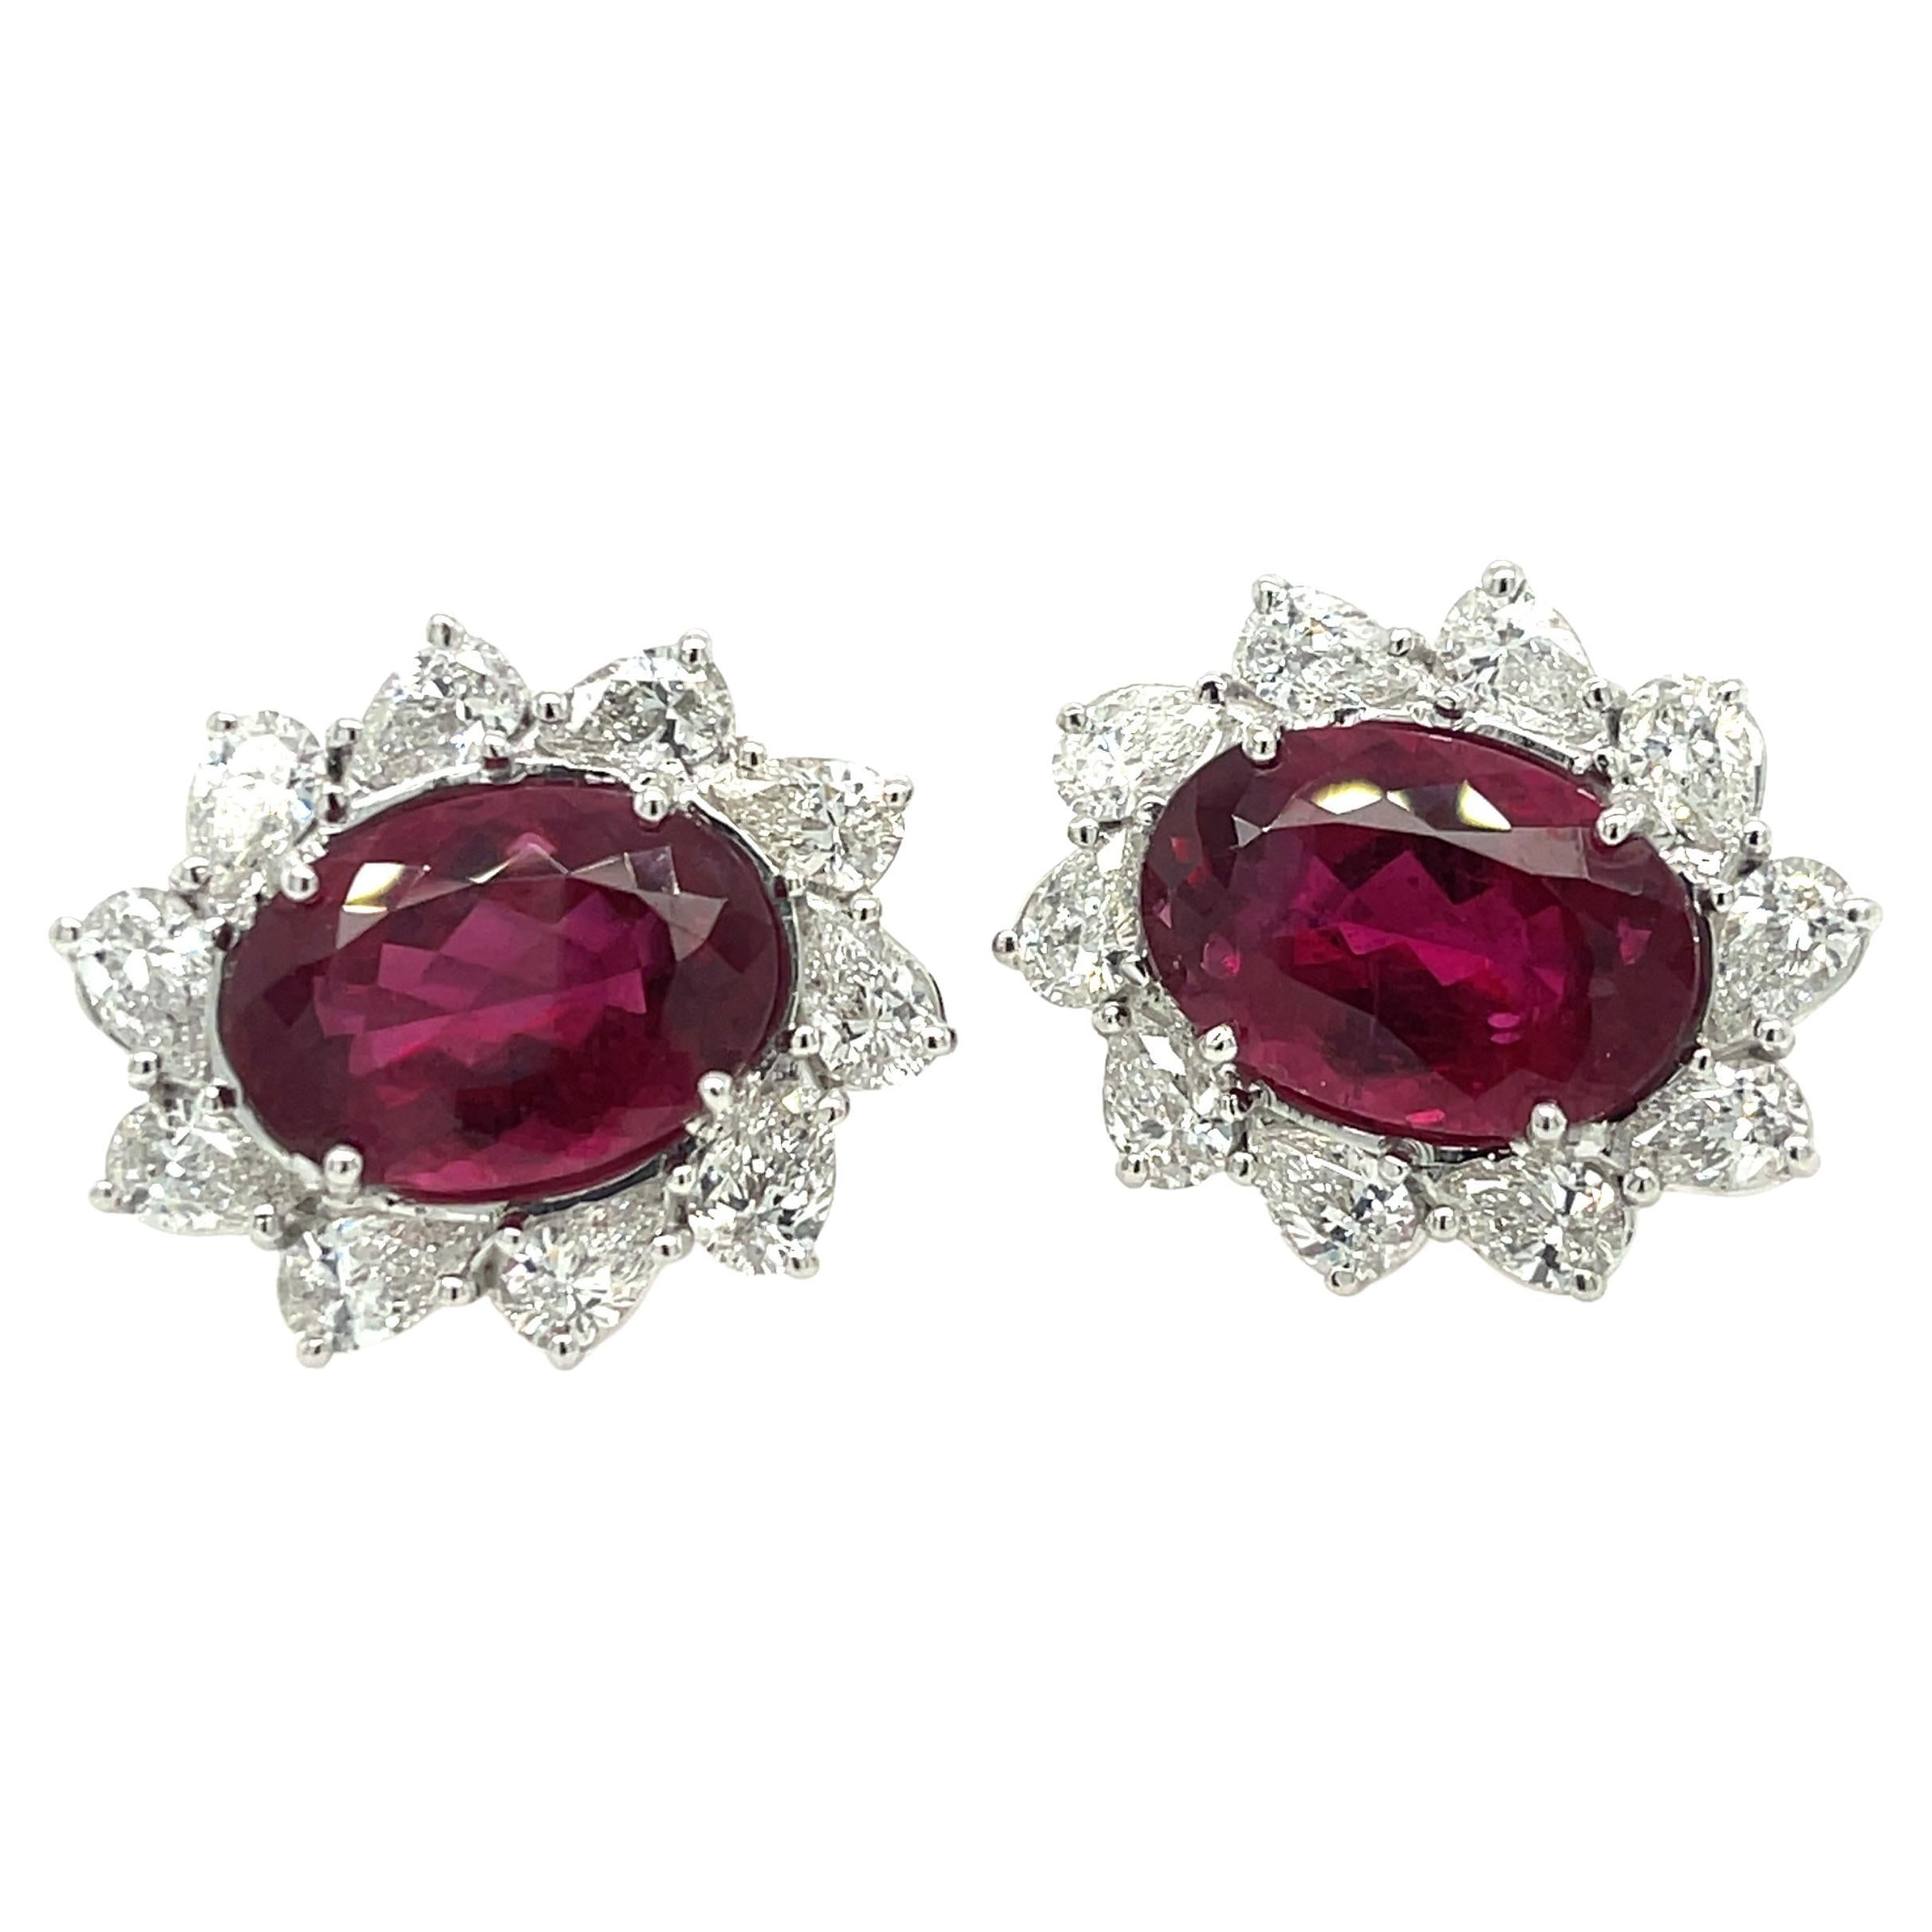 Rubellite And Diamond Earrings In 18K White Gold, The Earrings Feature Two Oval Cut Rubellites (12.17Ctw) And 20 Pear Shape Diamonds (3.83Ctw).
1